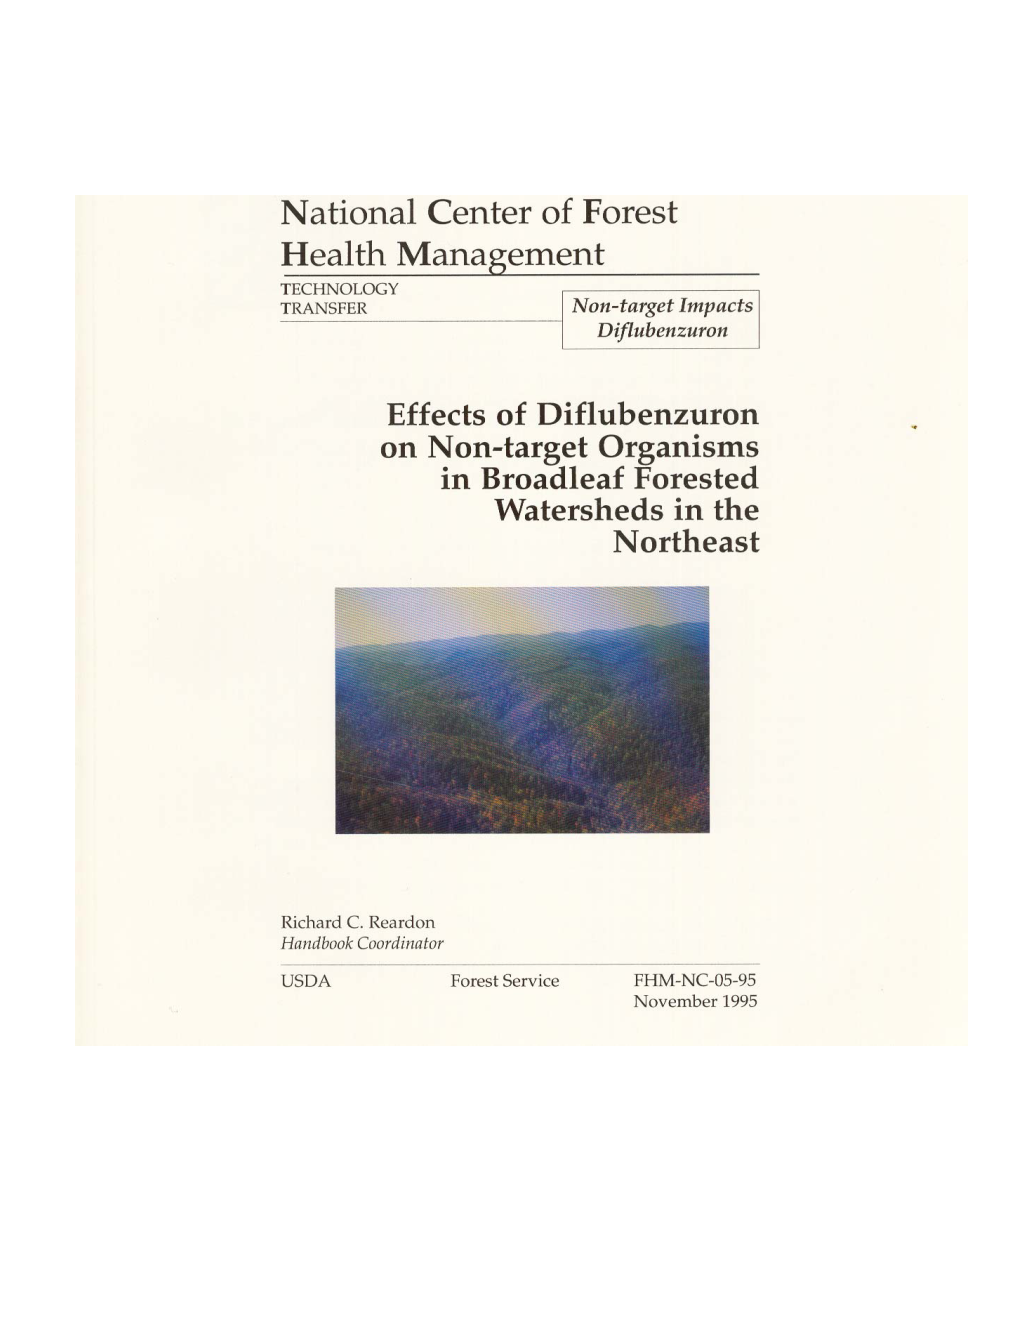 Effects of Diflubenzuron on Nontarget Organisms in Broadleaf Forested Watersheds in the Northeast